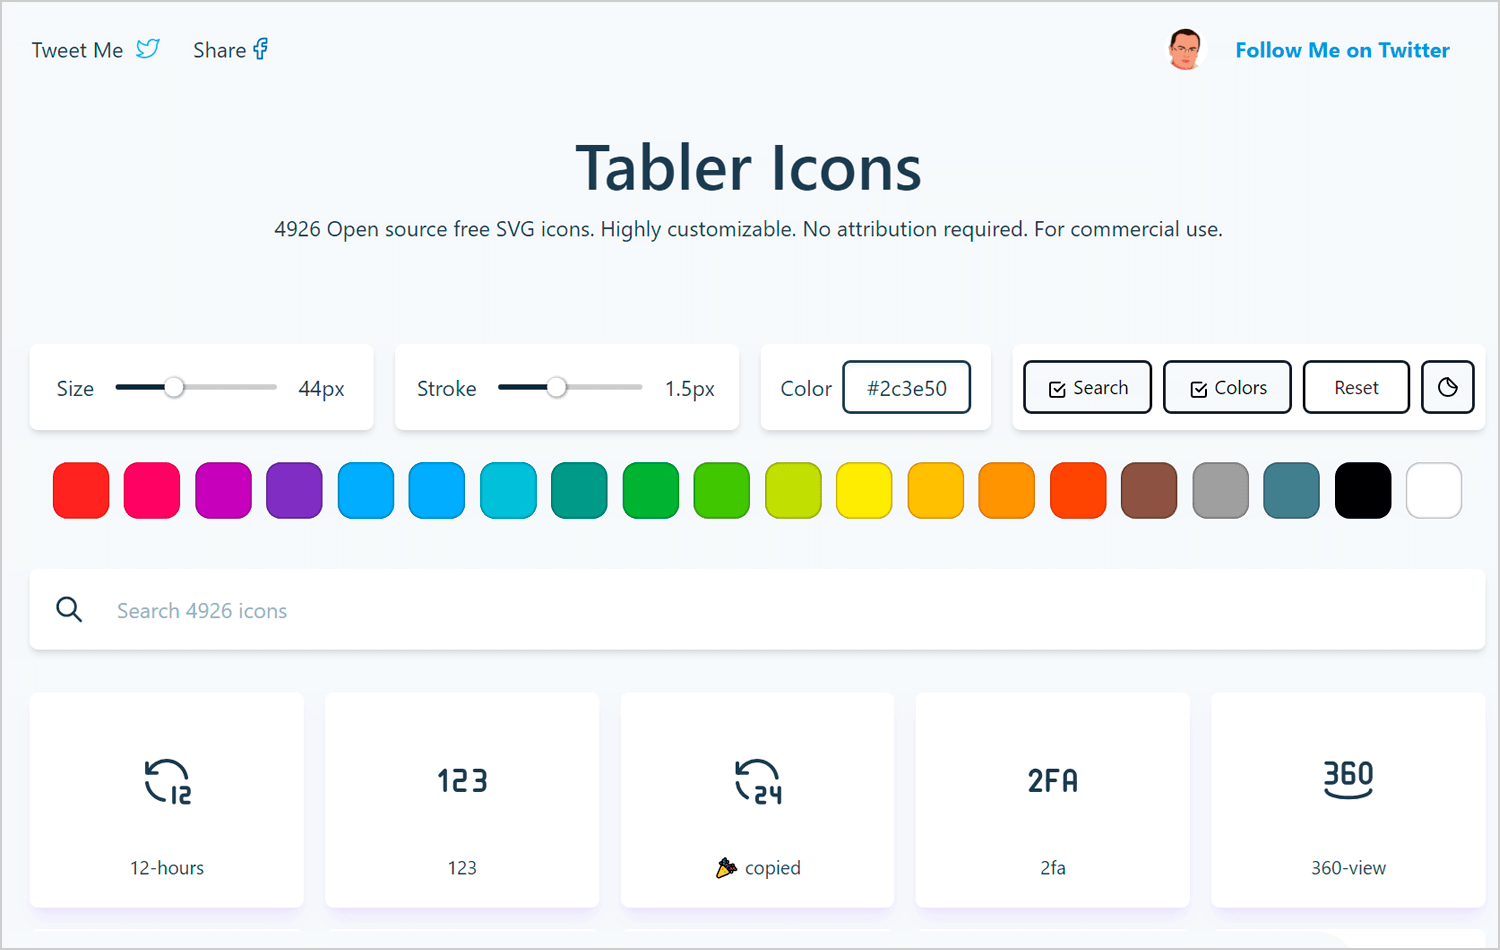 Customization interface for Tabler Icons